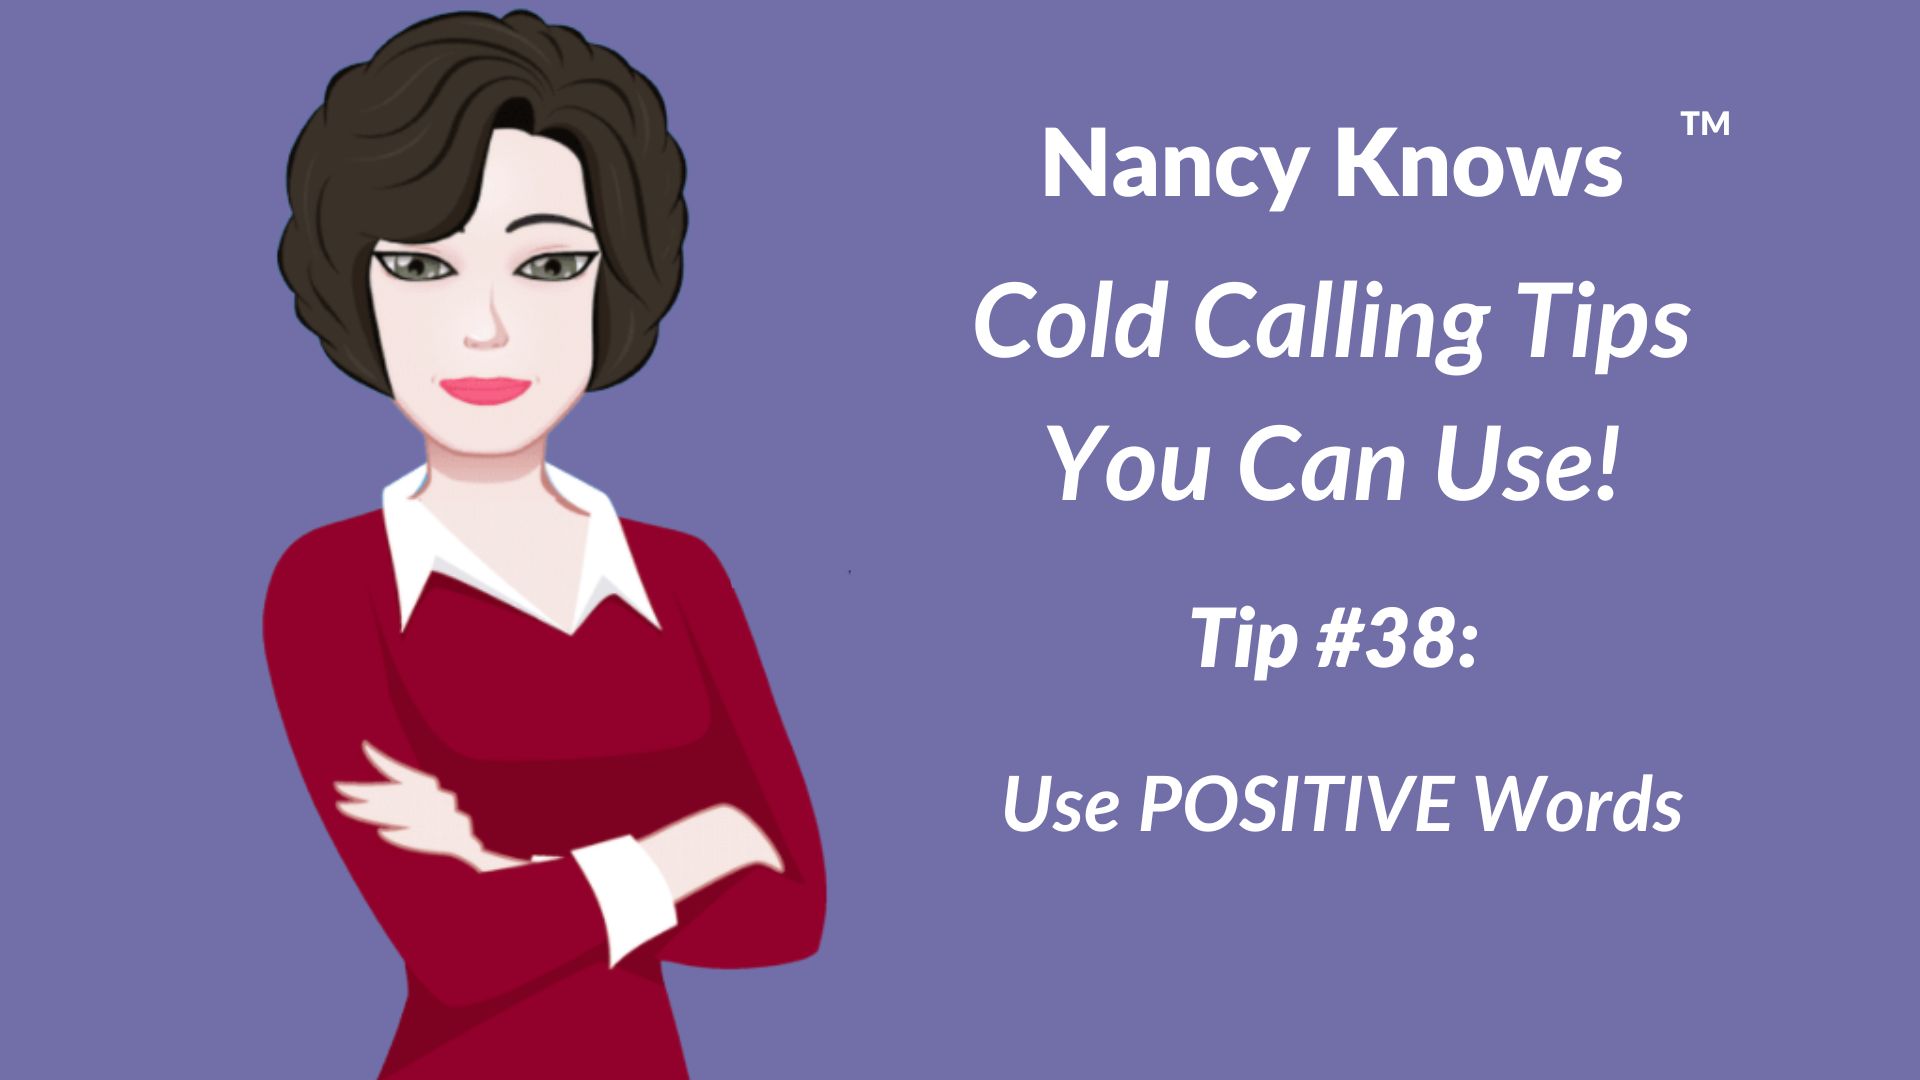 Nancy Knows #38: Use Positive Words